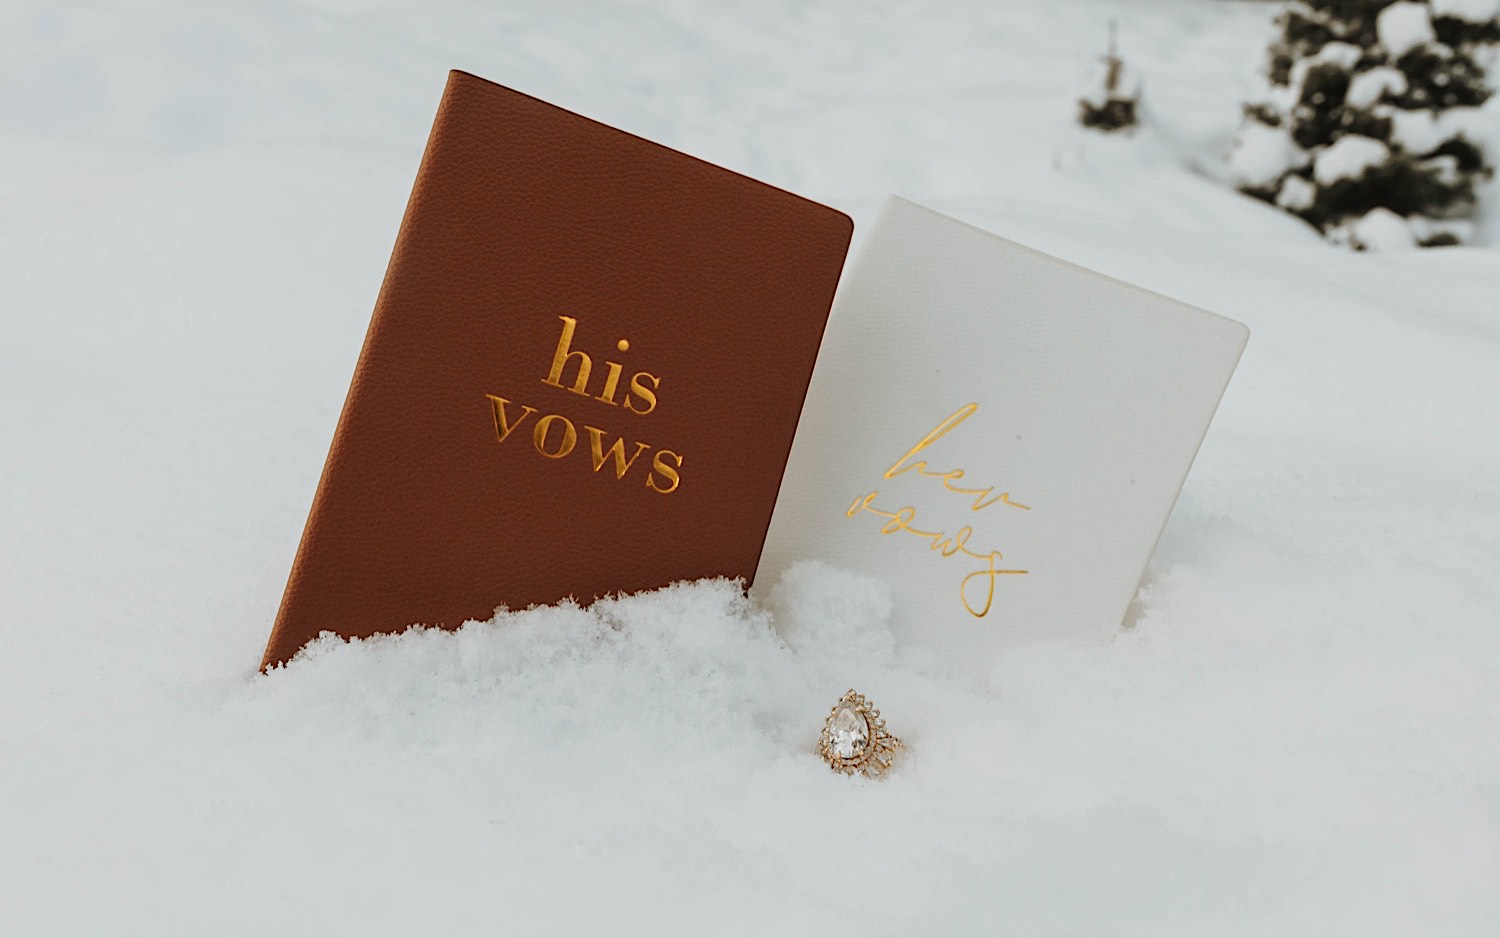 2 books reading "his vows" and "her vows" sit in the snow with a wedding ring in between them